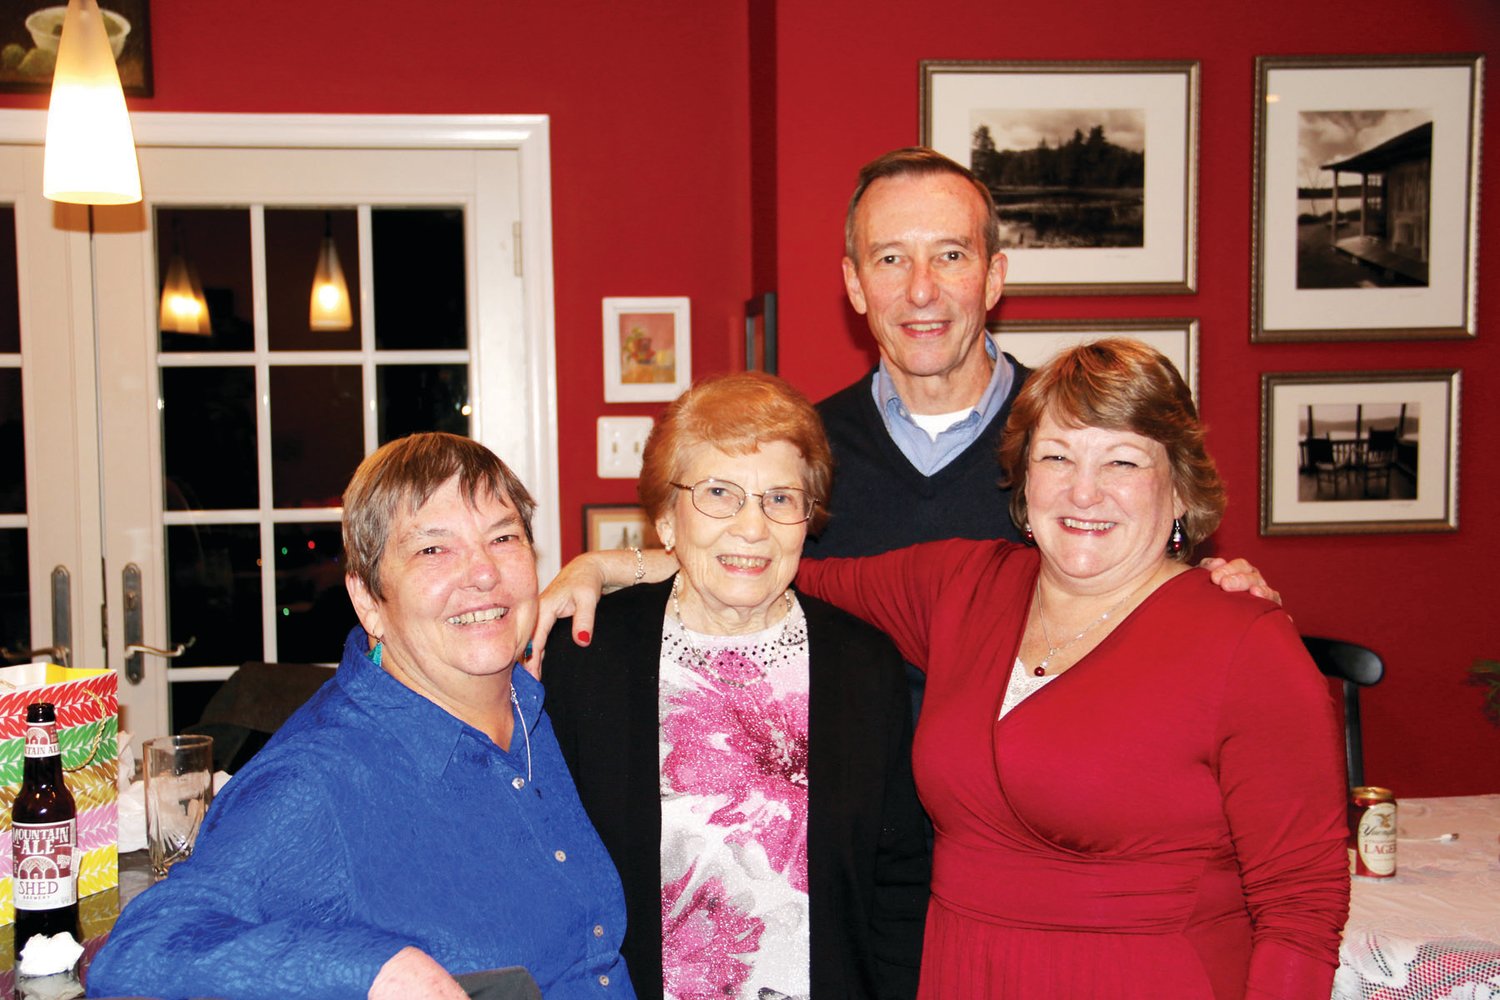 Jean Rutherford, whose family has owned an operated Rutherford's Camera Shop in downtown Doylestown for decades, celebrated her 100th birthday on Dec. 5. From left are her daughter, Susan Rutherford, Jean Rutherford, and daughter, Kristin Daniels. Jean's son, Lee Rutherford is standing with his family.